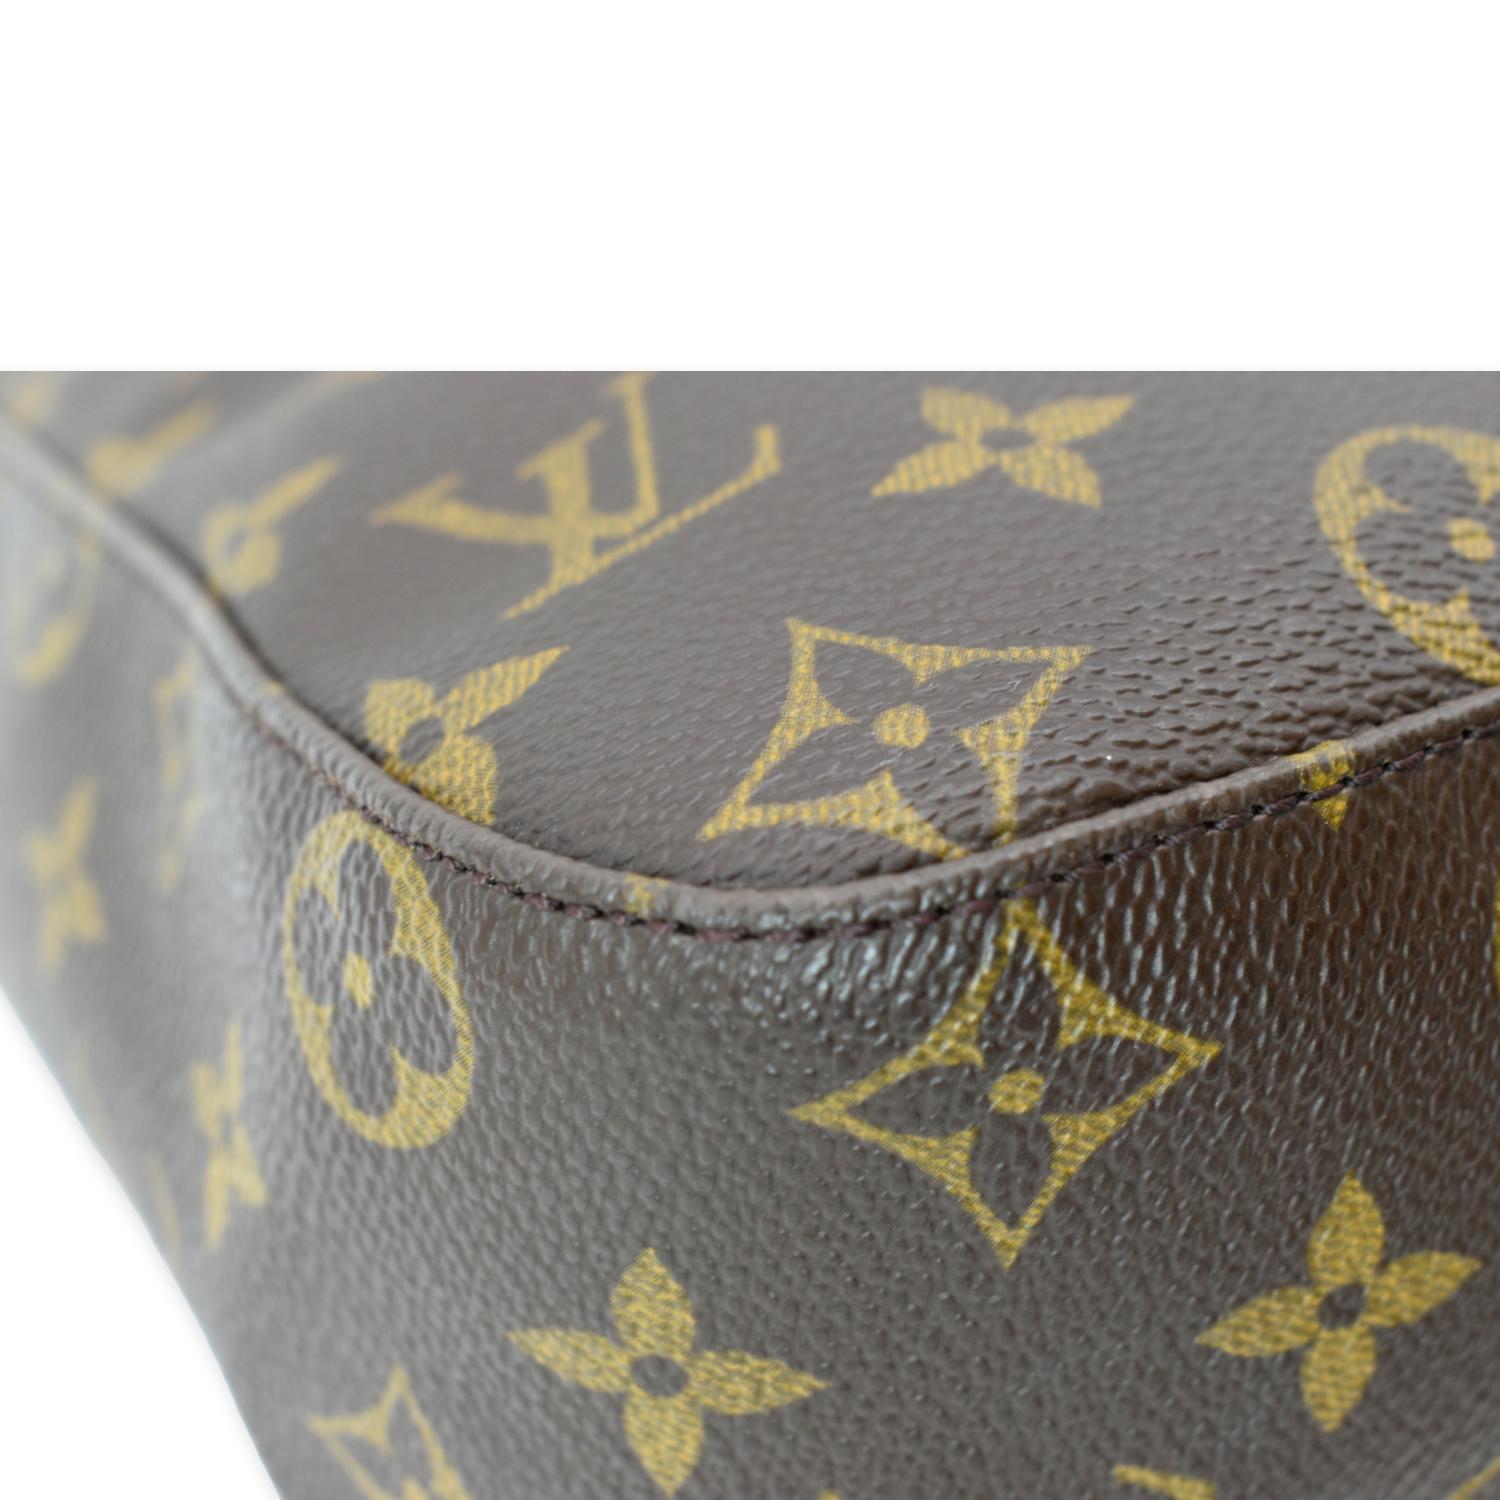 Sold at Auction: Louis Vuitton Monogram Canvas Looping PM Handbag Date  Code: SD0081